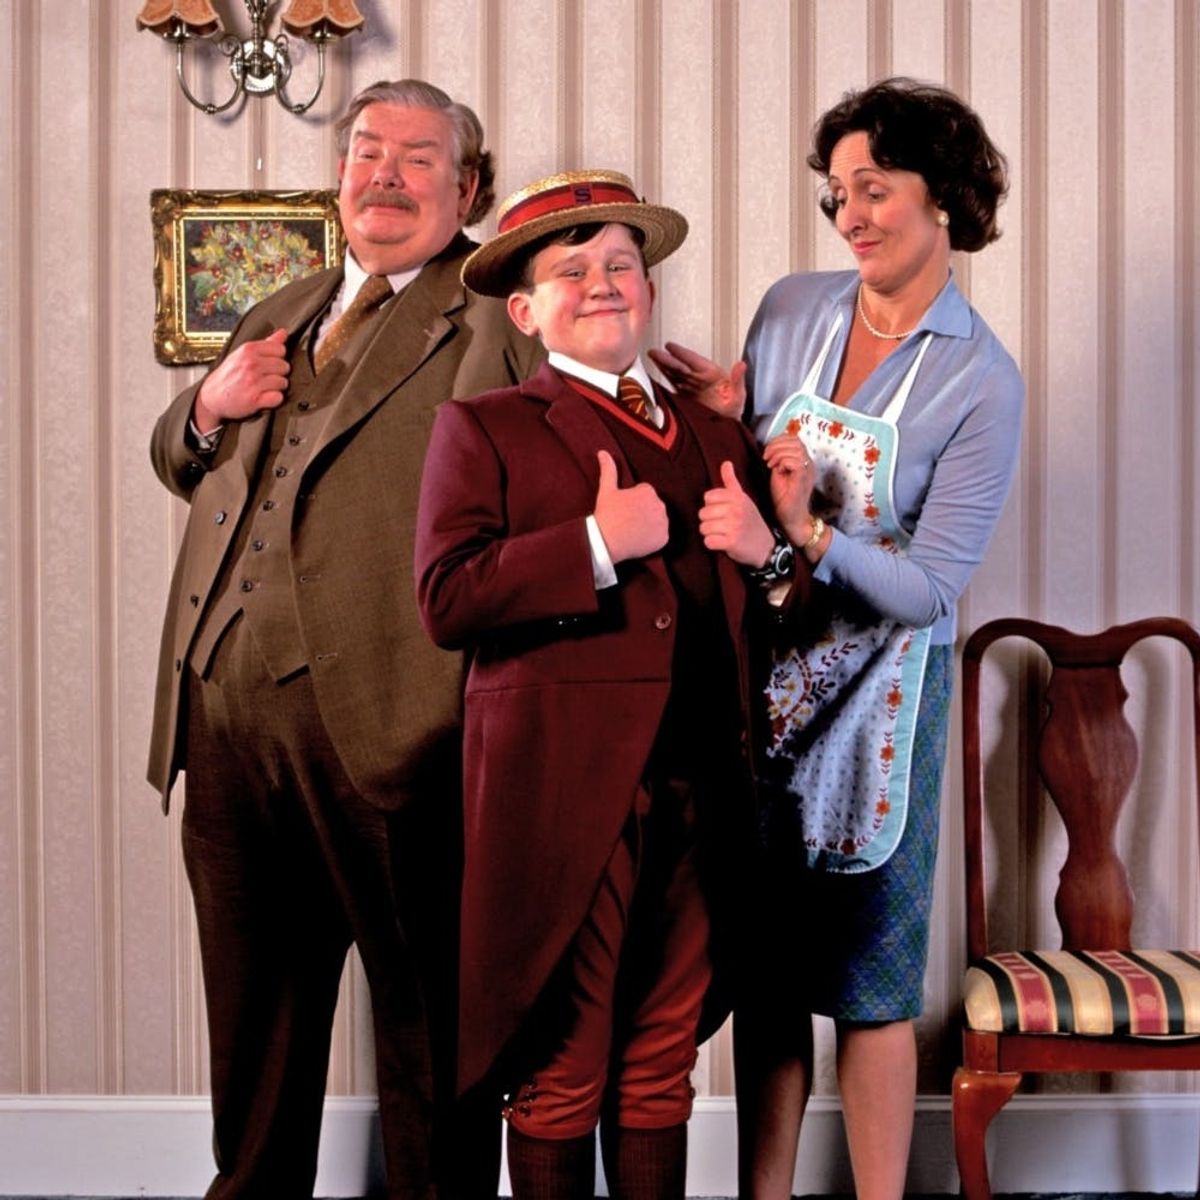 You Won’t Believe What Harry Potter’s Cousin Dudley Dursley Looks Like Now